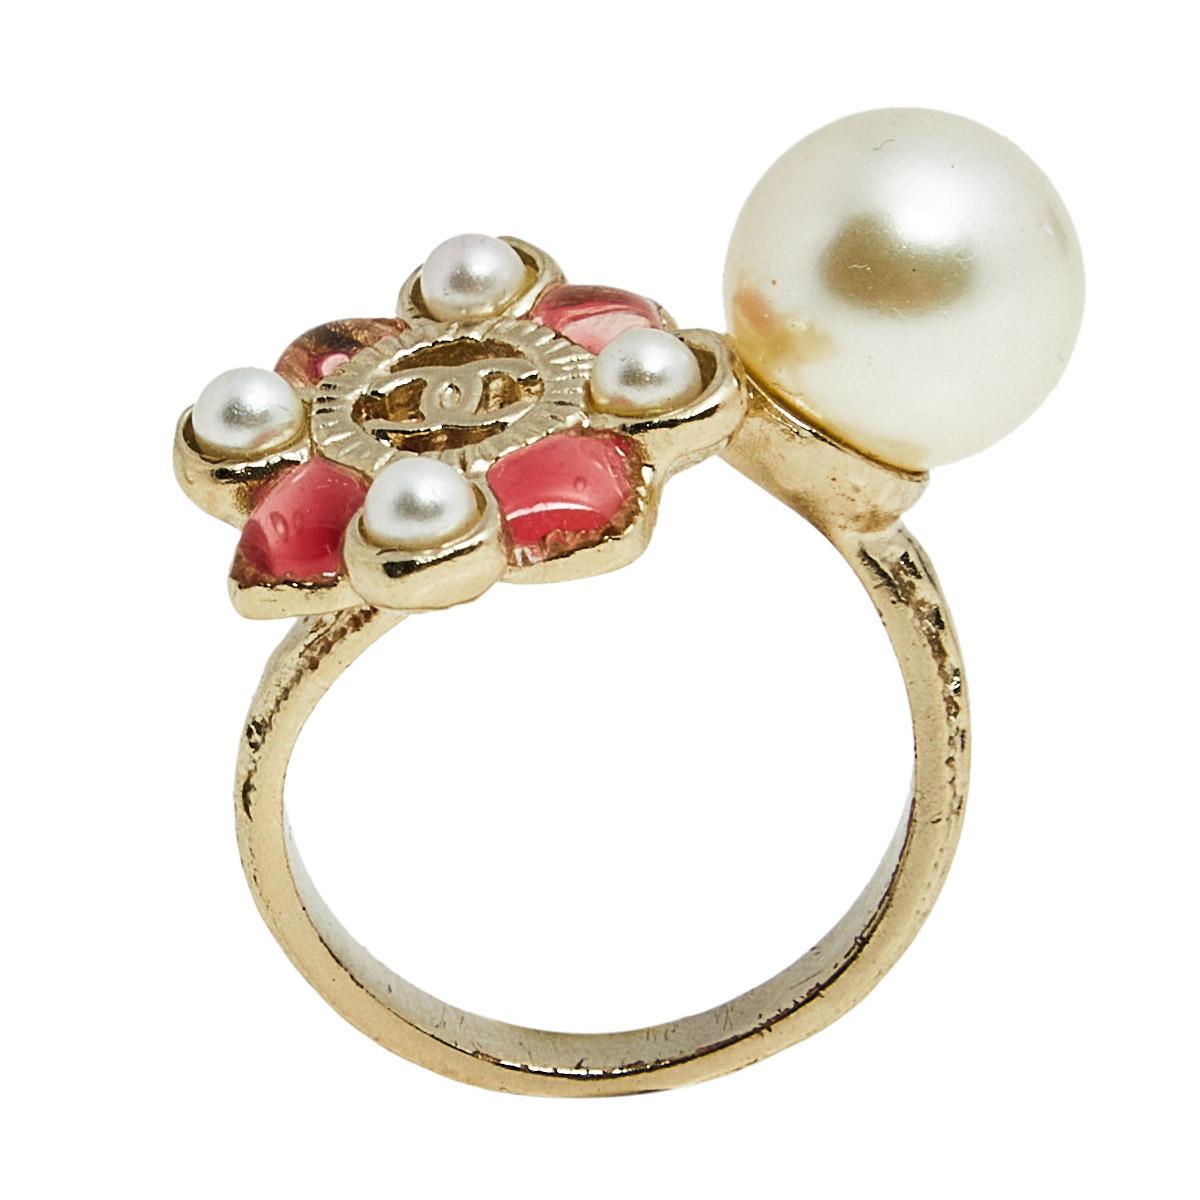 Women's Chanel Pink Gripoix Pearl Gold Tone Floral Cocktail Ring Size EU 54